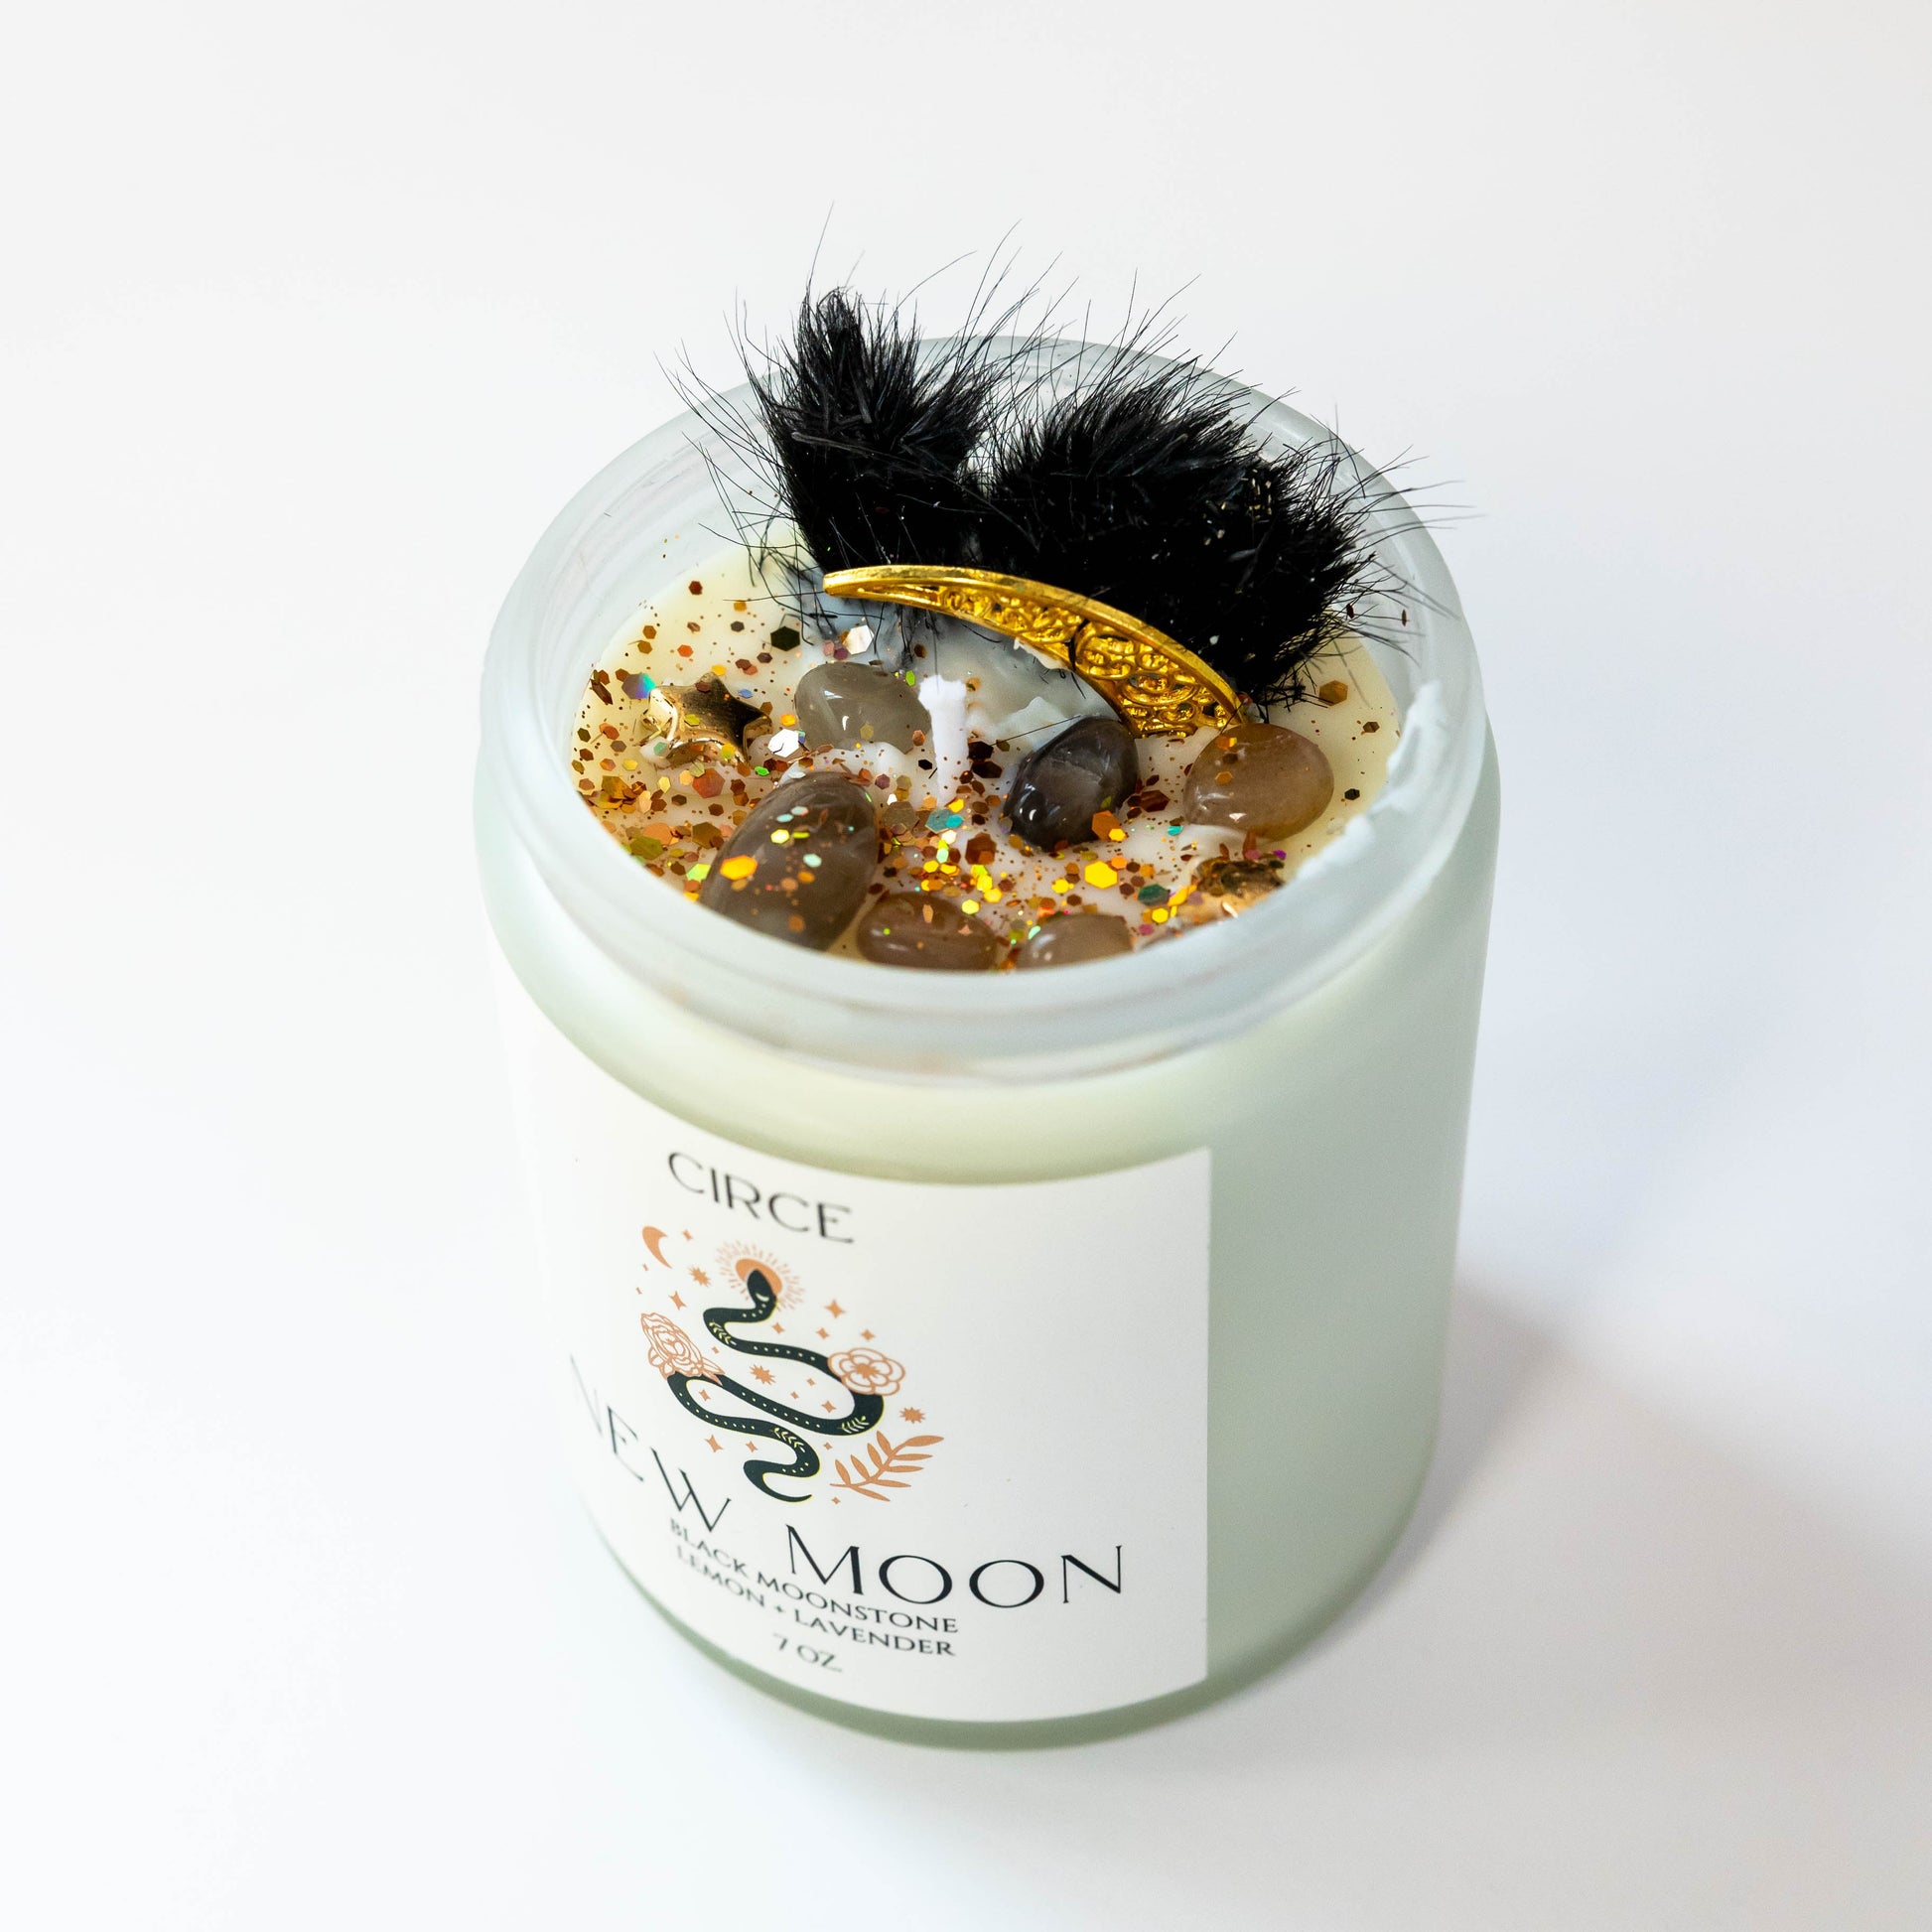 New Moon Intention Candle Candle from Circe Boutique